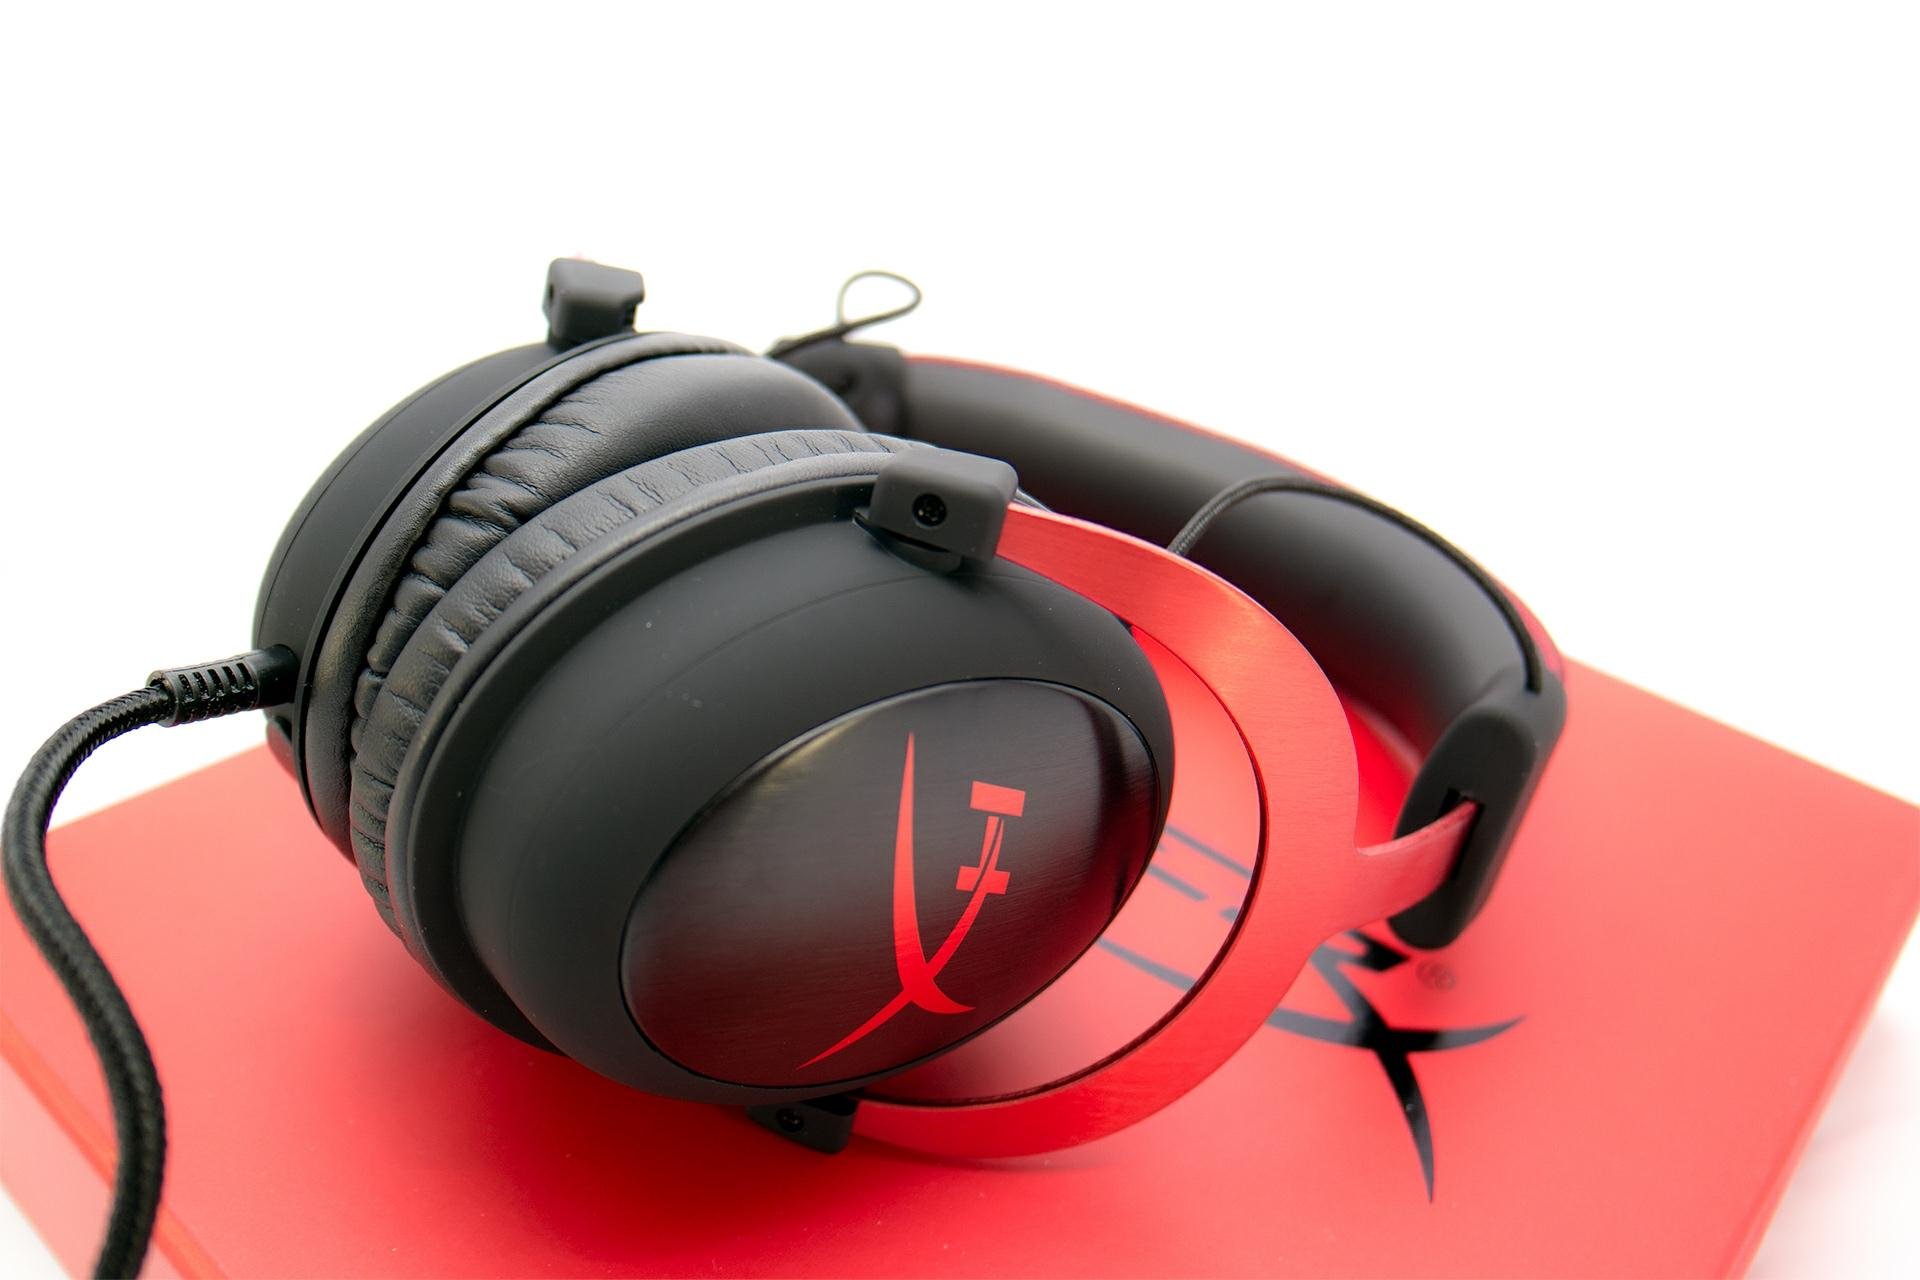 More information about "HyperX Cloud II Review"